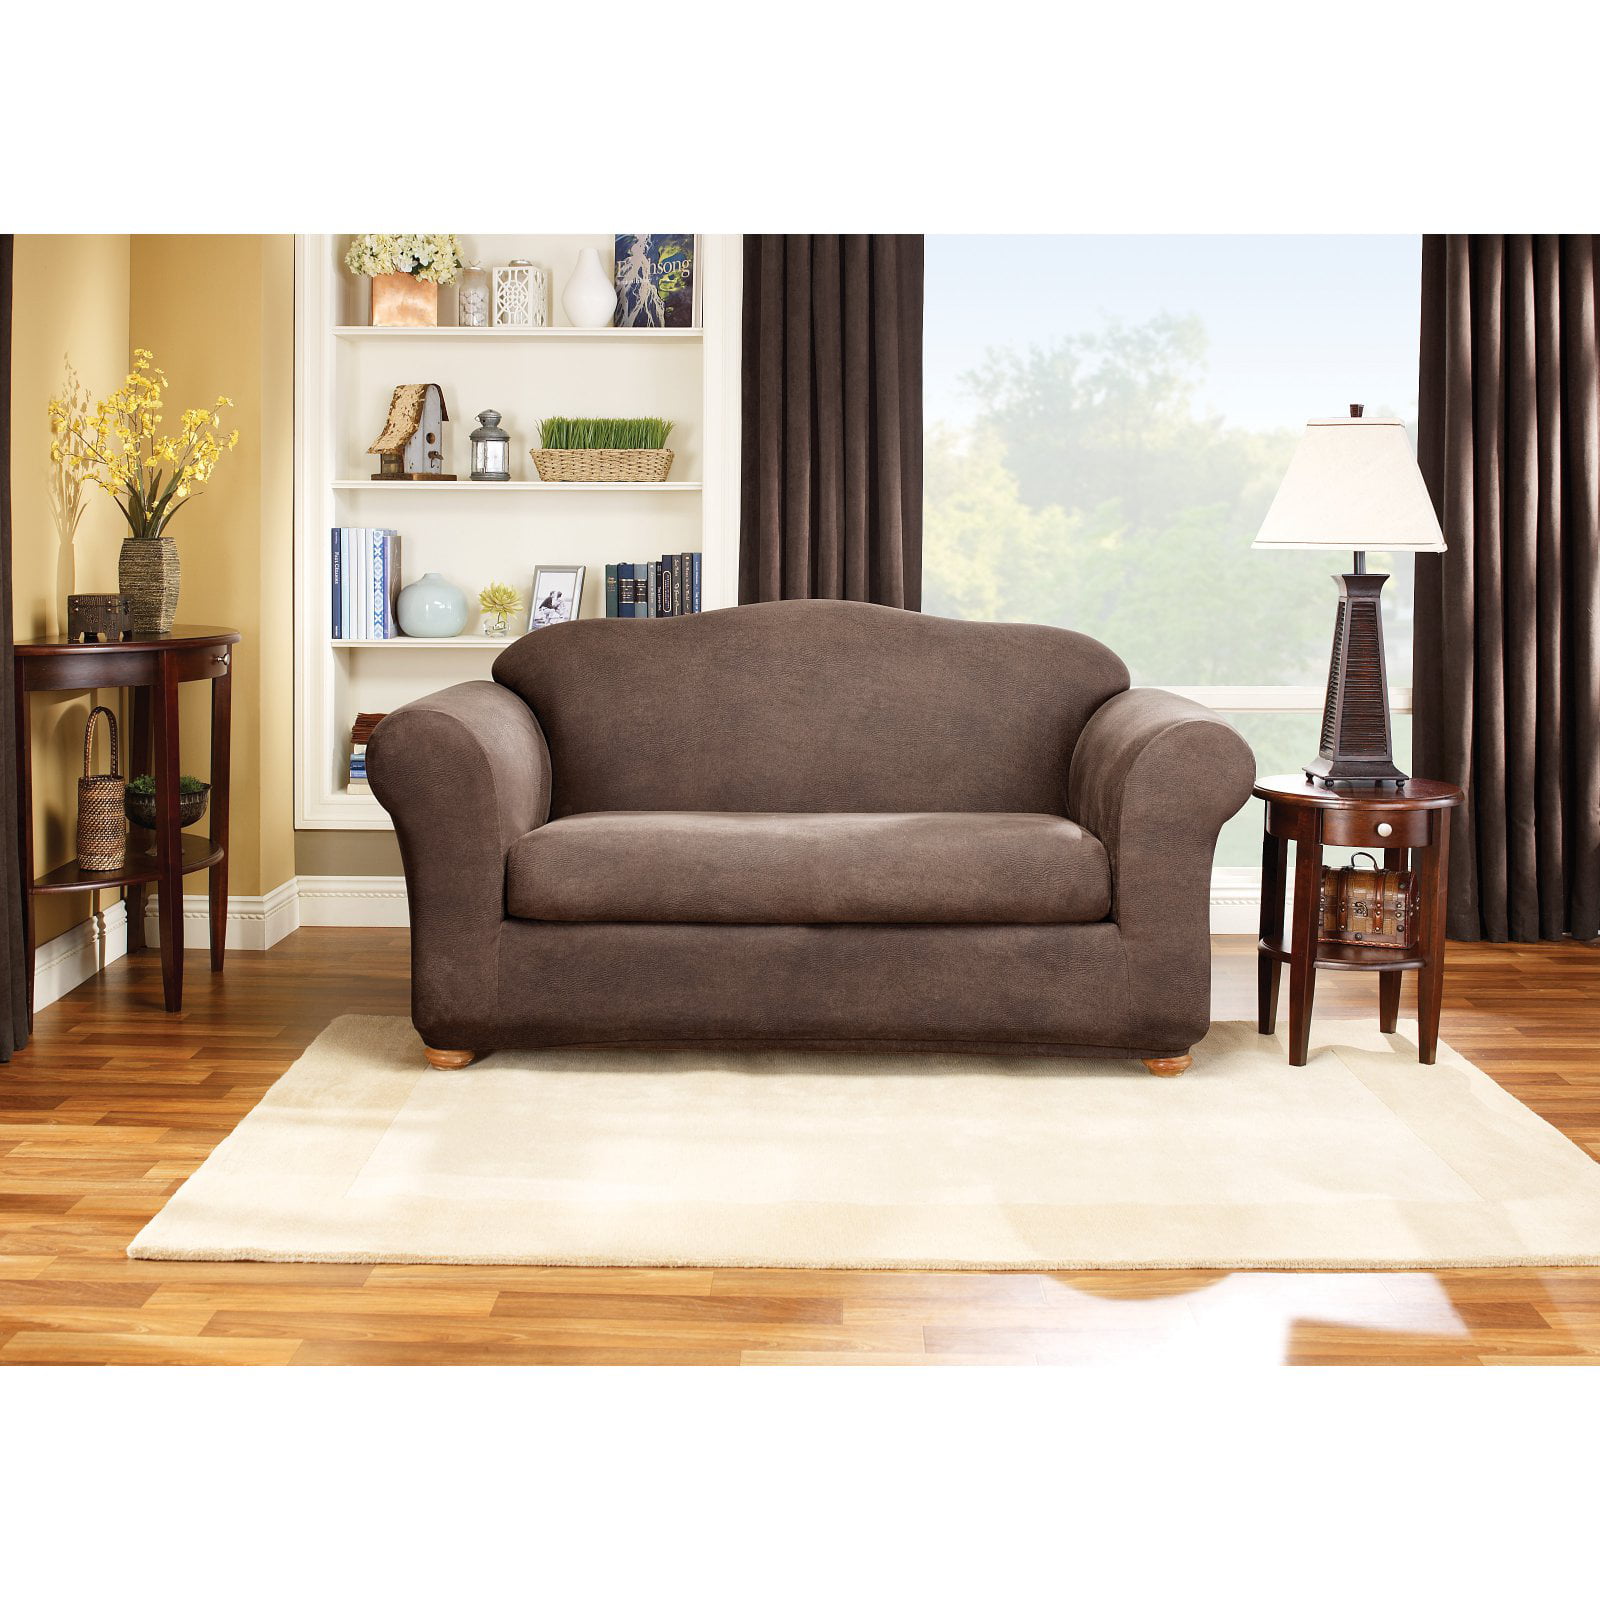 Sure Fit Stretch Leather 2 Piece Sofa, Faux Leather Slipcover